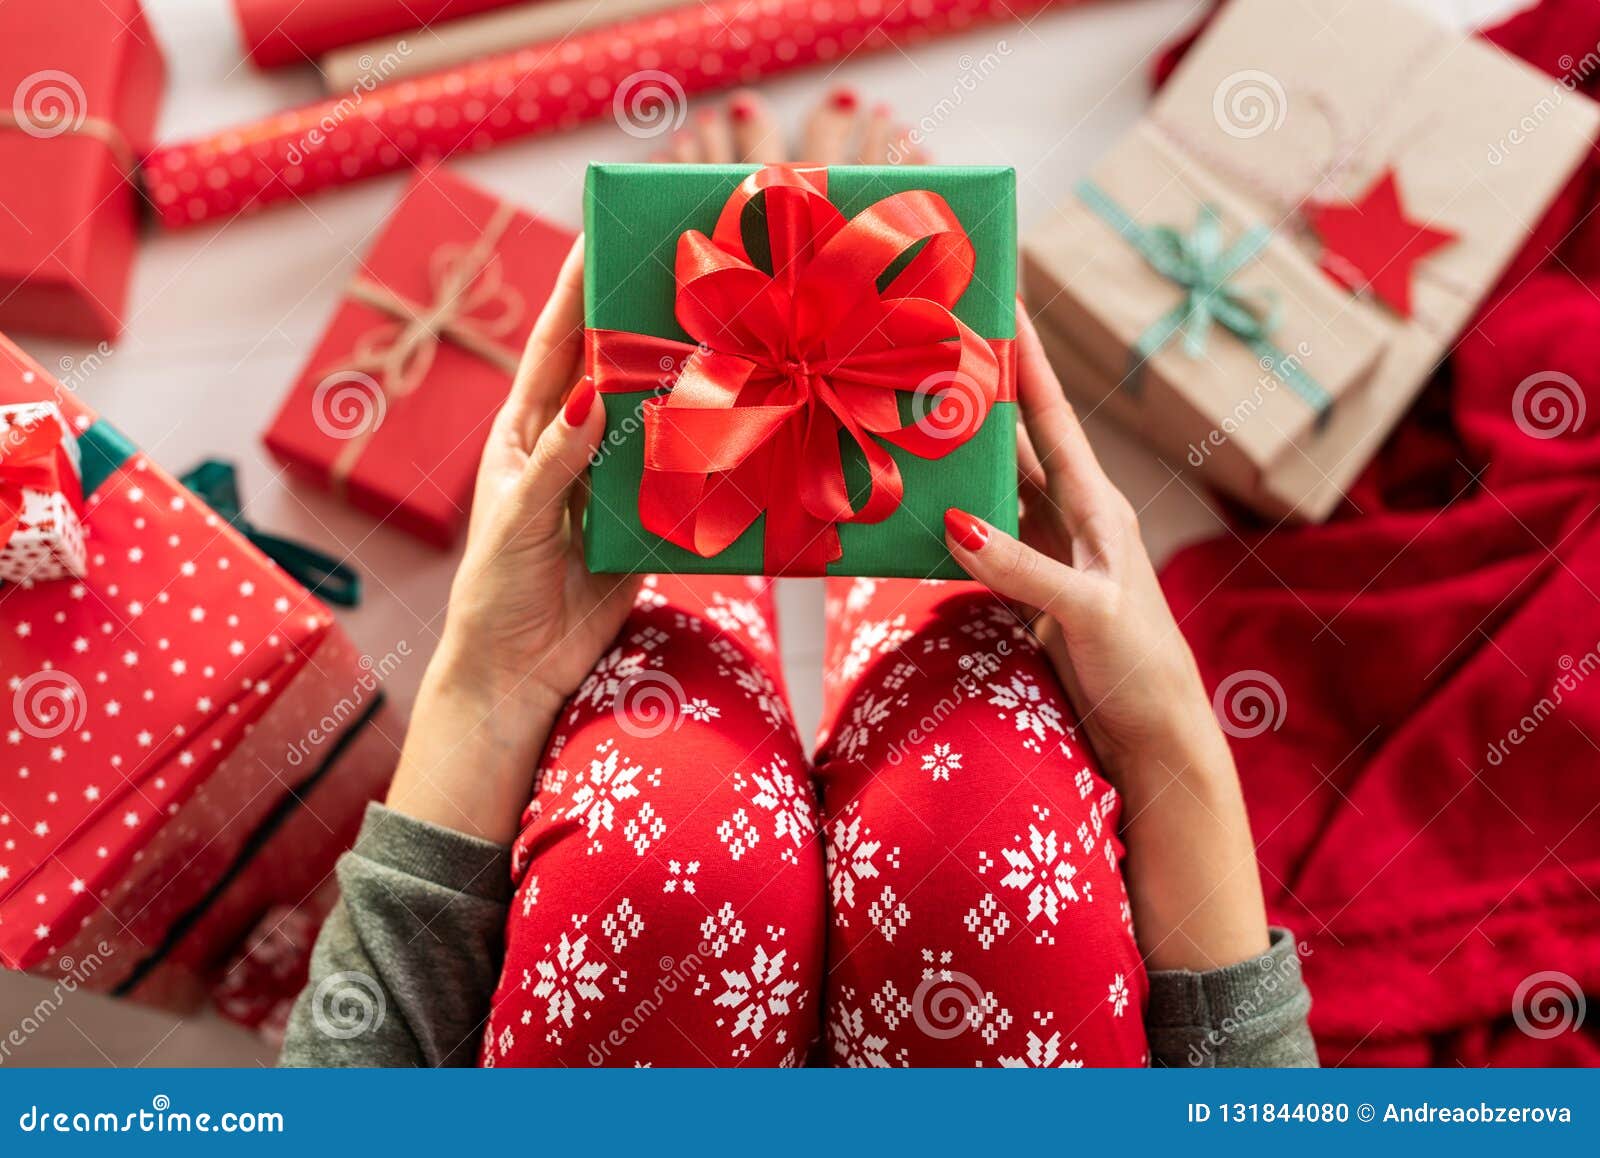 Young Woman Wearing Xmas Pajamas Sitting On The Floor Amongst Wrapped Christmas Presents